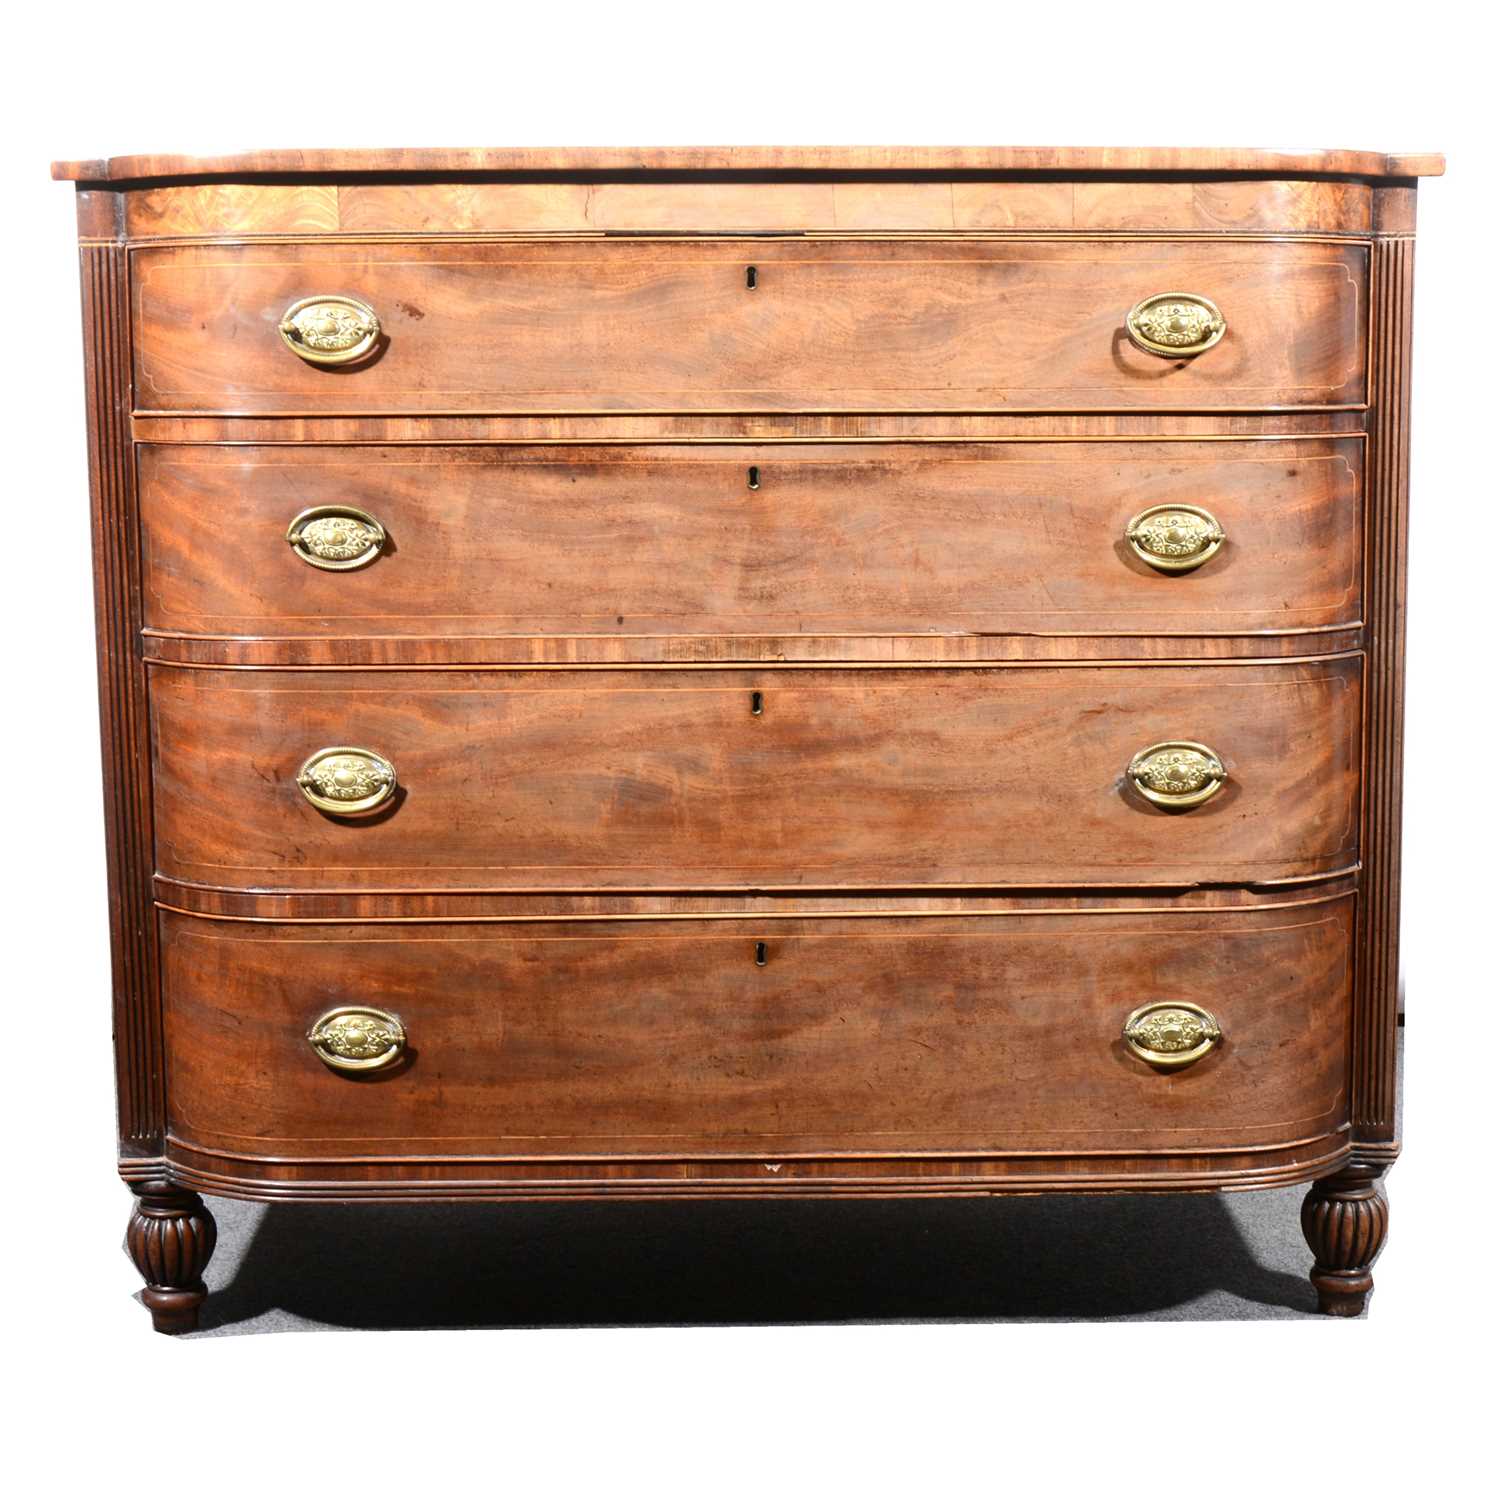 Lot 62 - A Regency  mahoganybreakfront chest of drawers